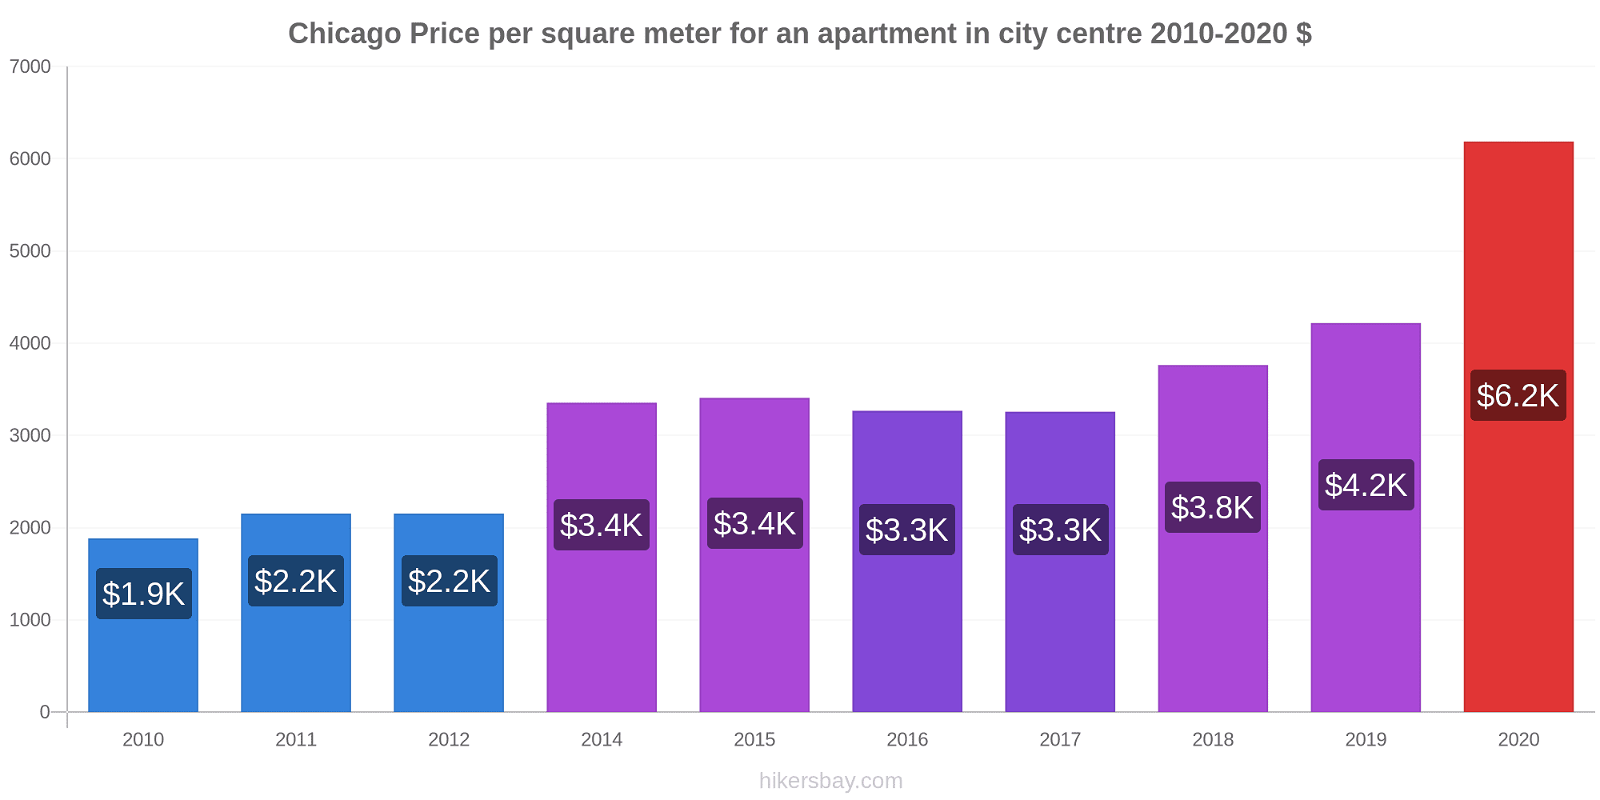 Chicago price changes Price per square meter for an apartment in city centre hikersbay.com